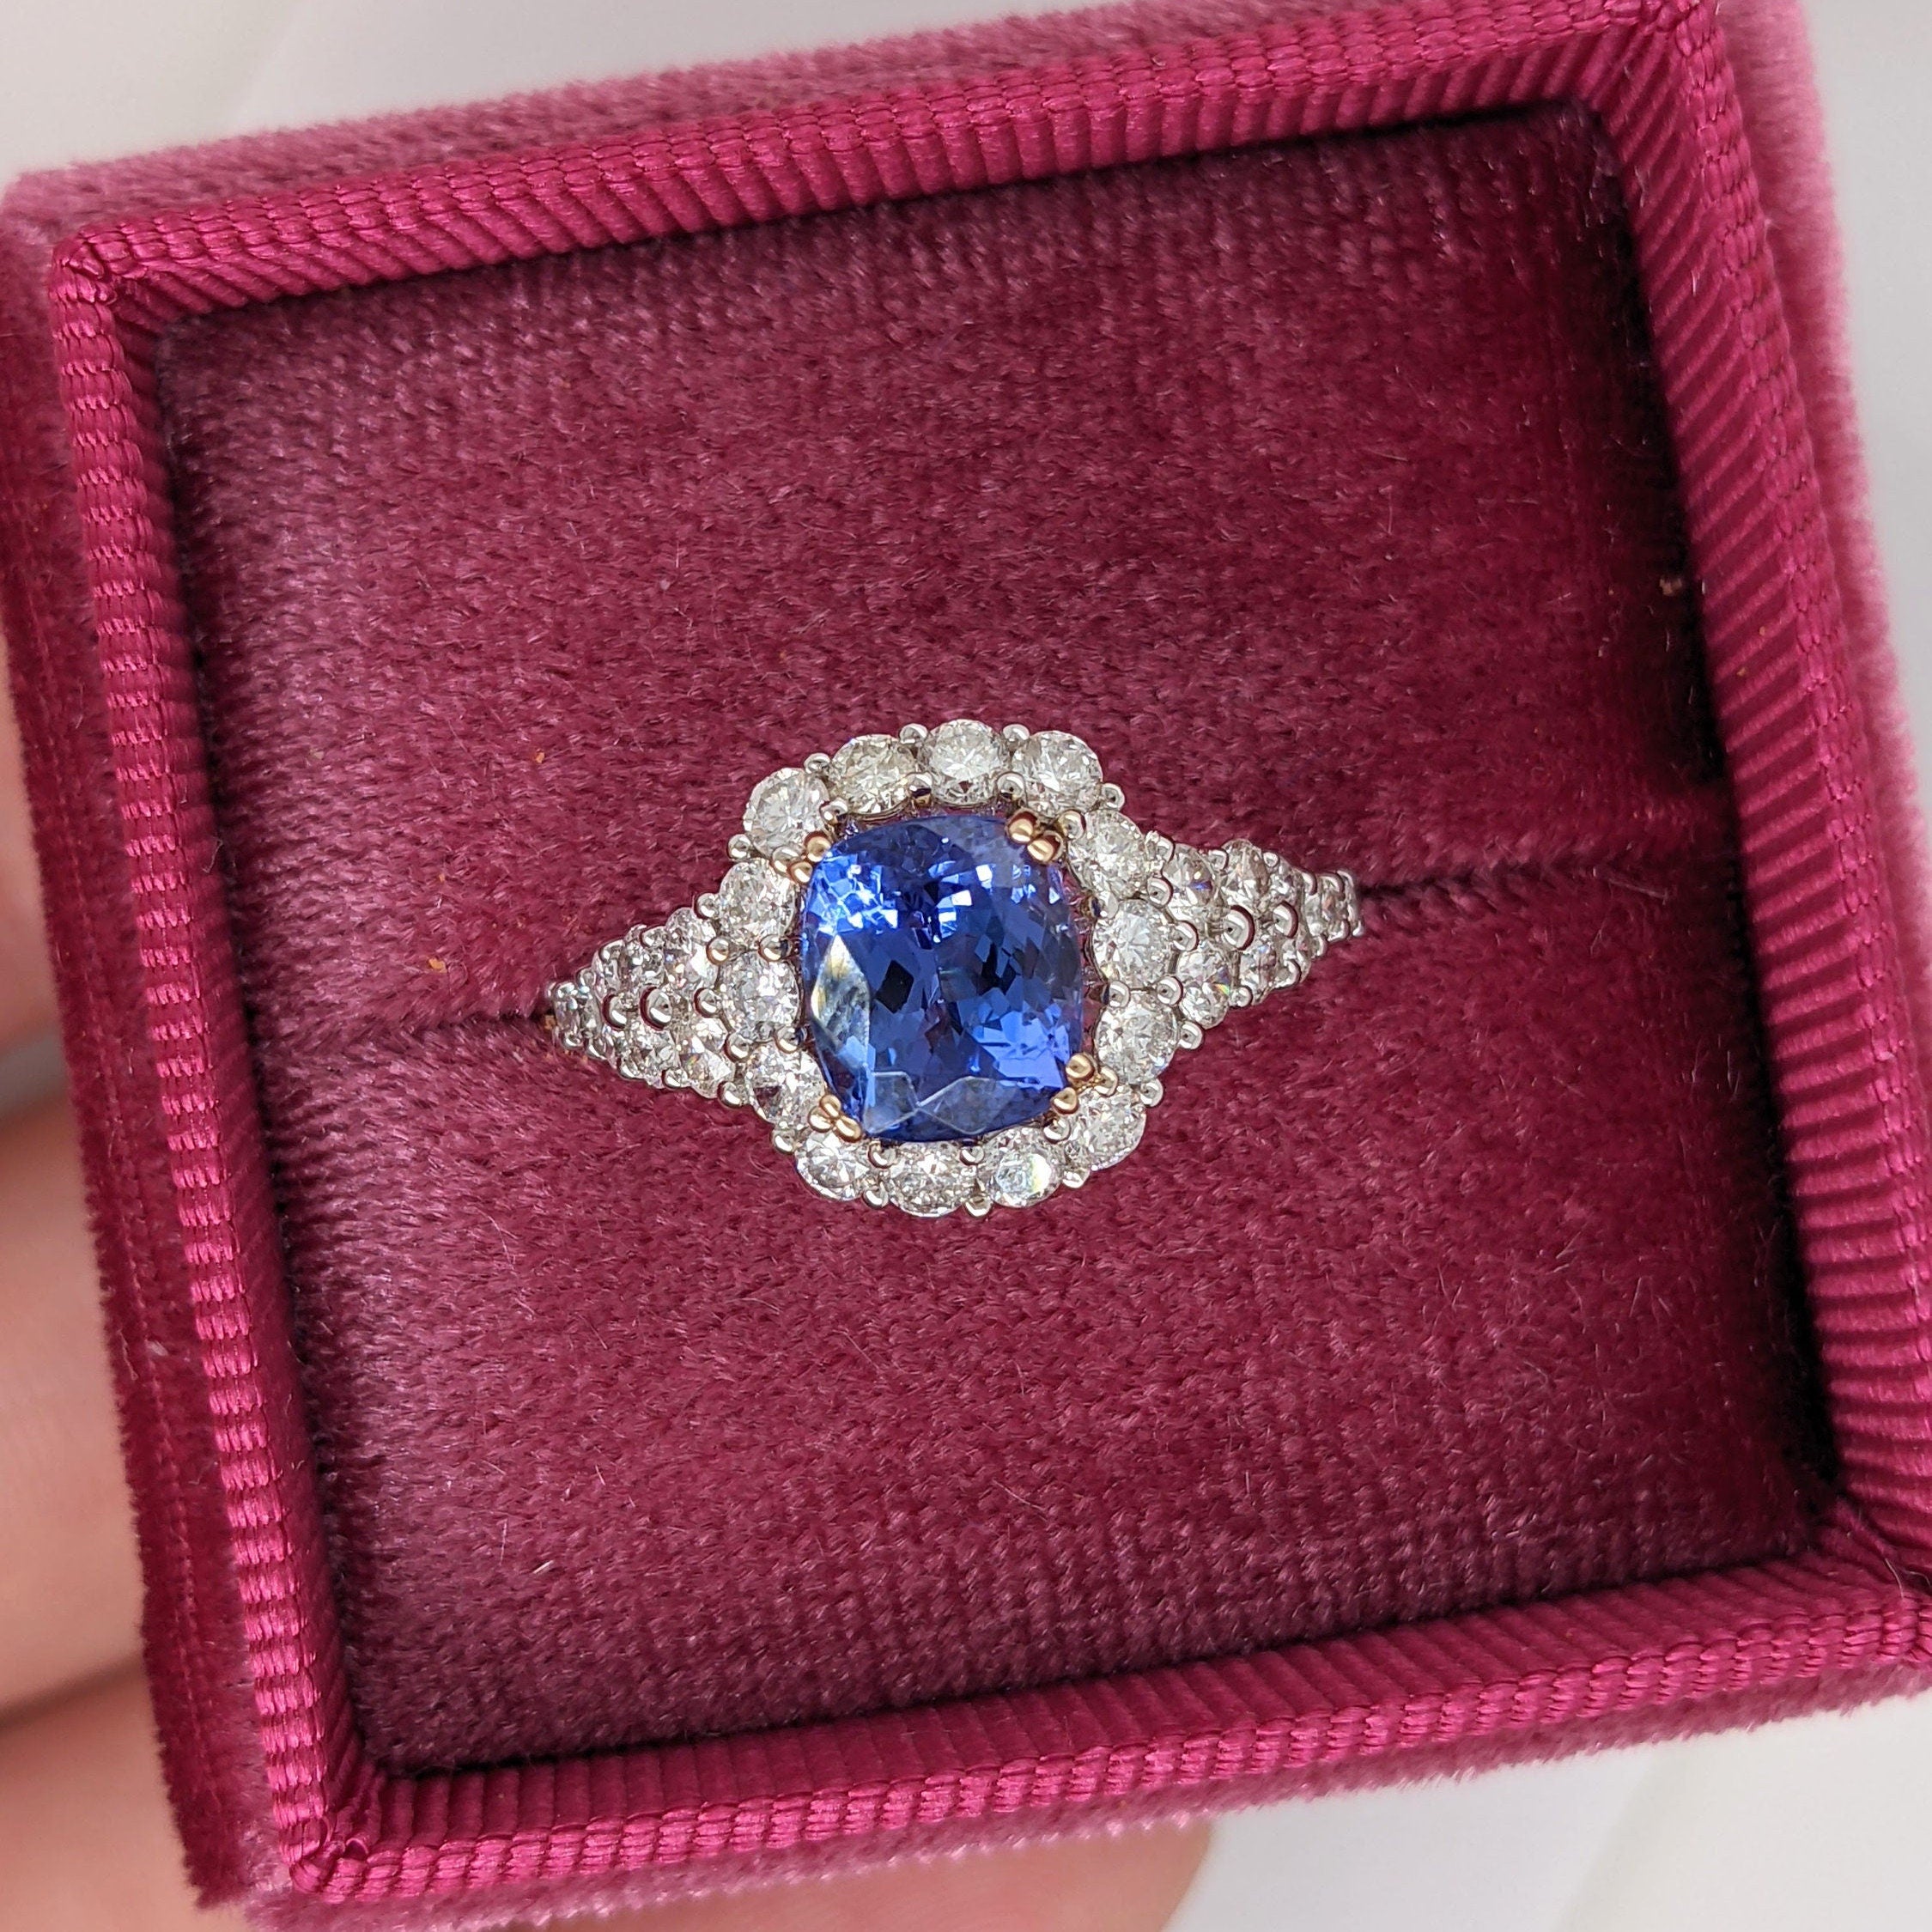 Stunning Tanzanite Ring in 14k Solid White and Yellow Dual Tone Gold with Double Halo of Natural Diamond | Cushion Cut | Tapered | December